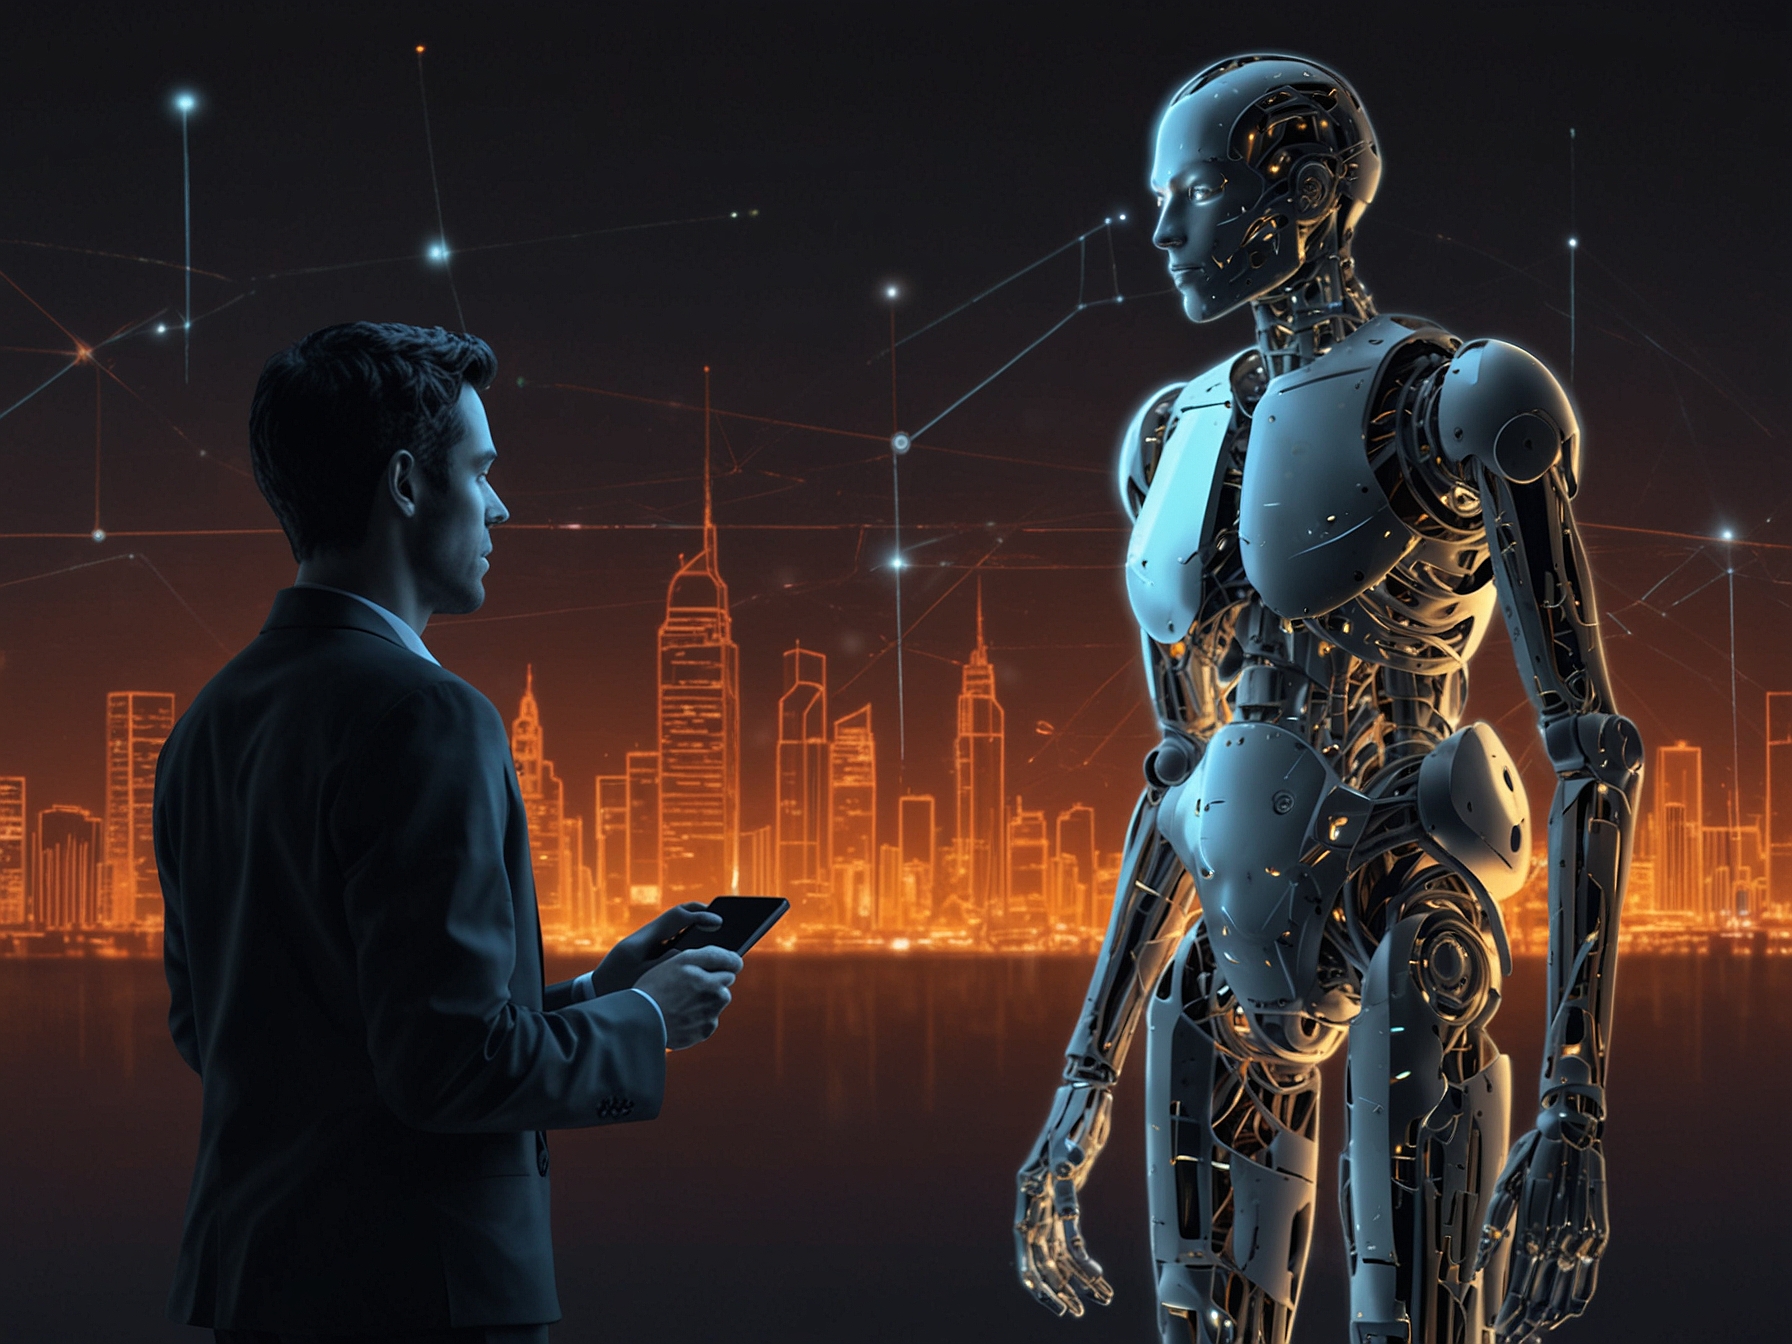 A digital human interacting with a user in a virtual environment, showcasing advancements in AI technology.